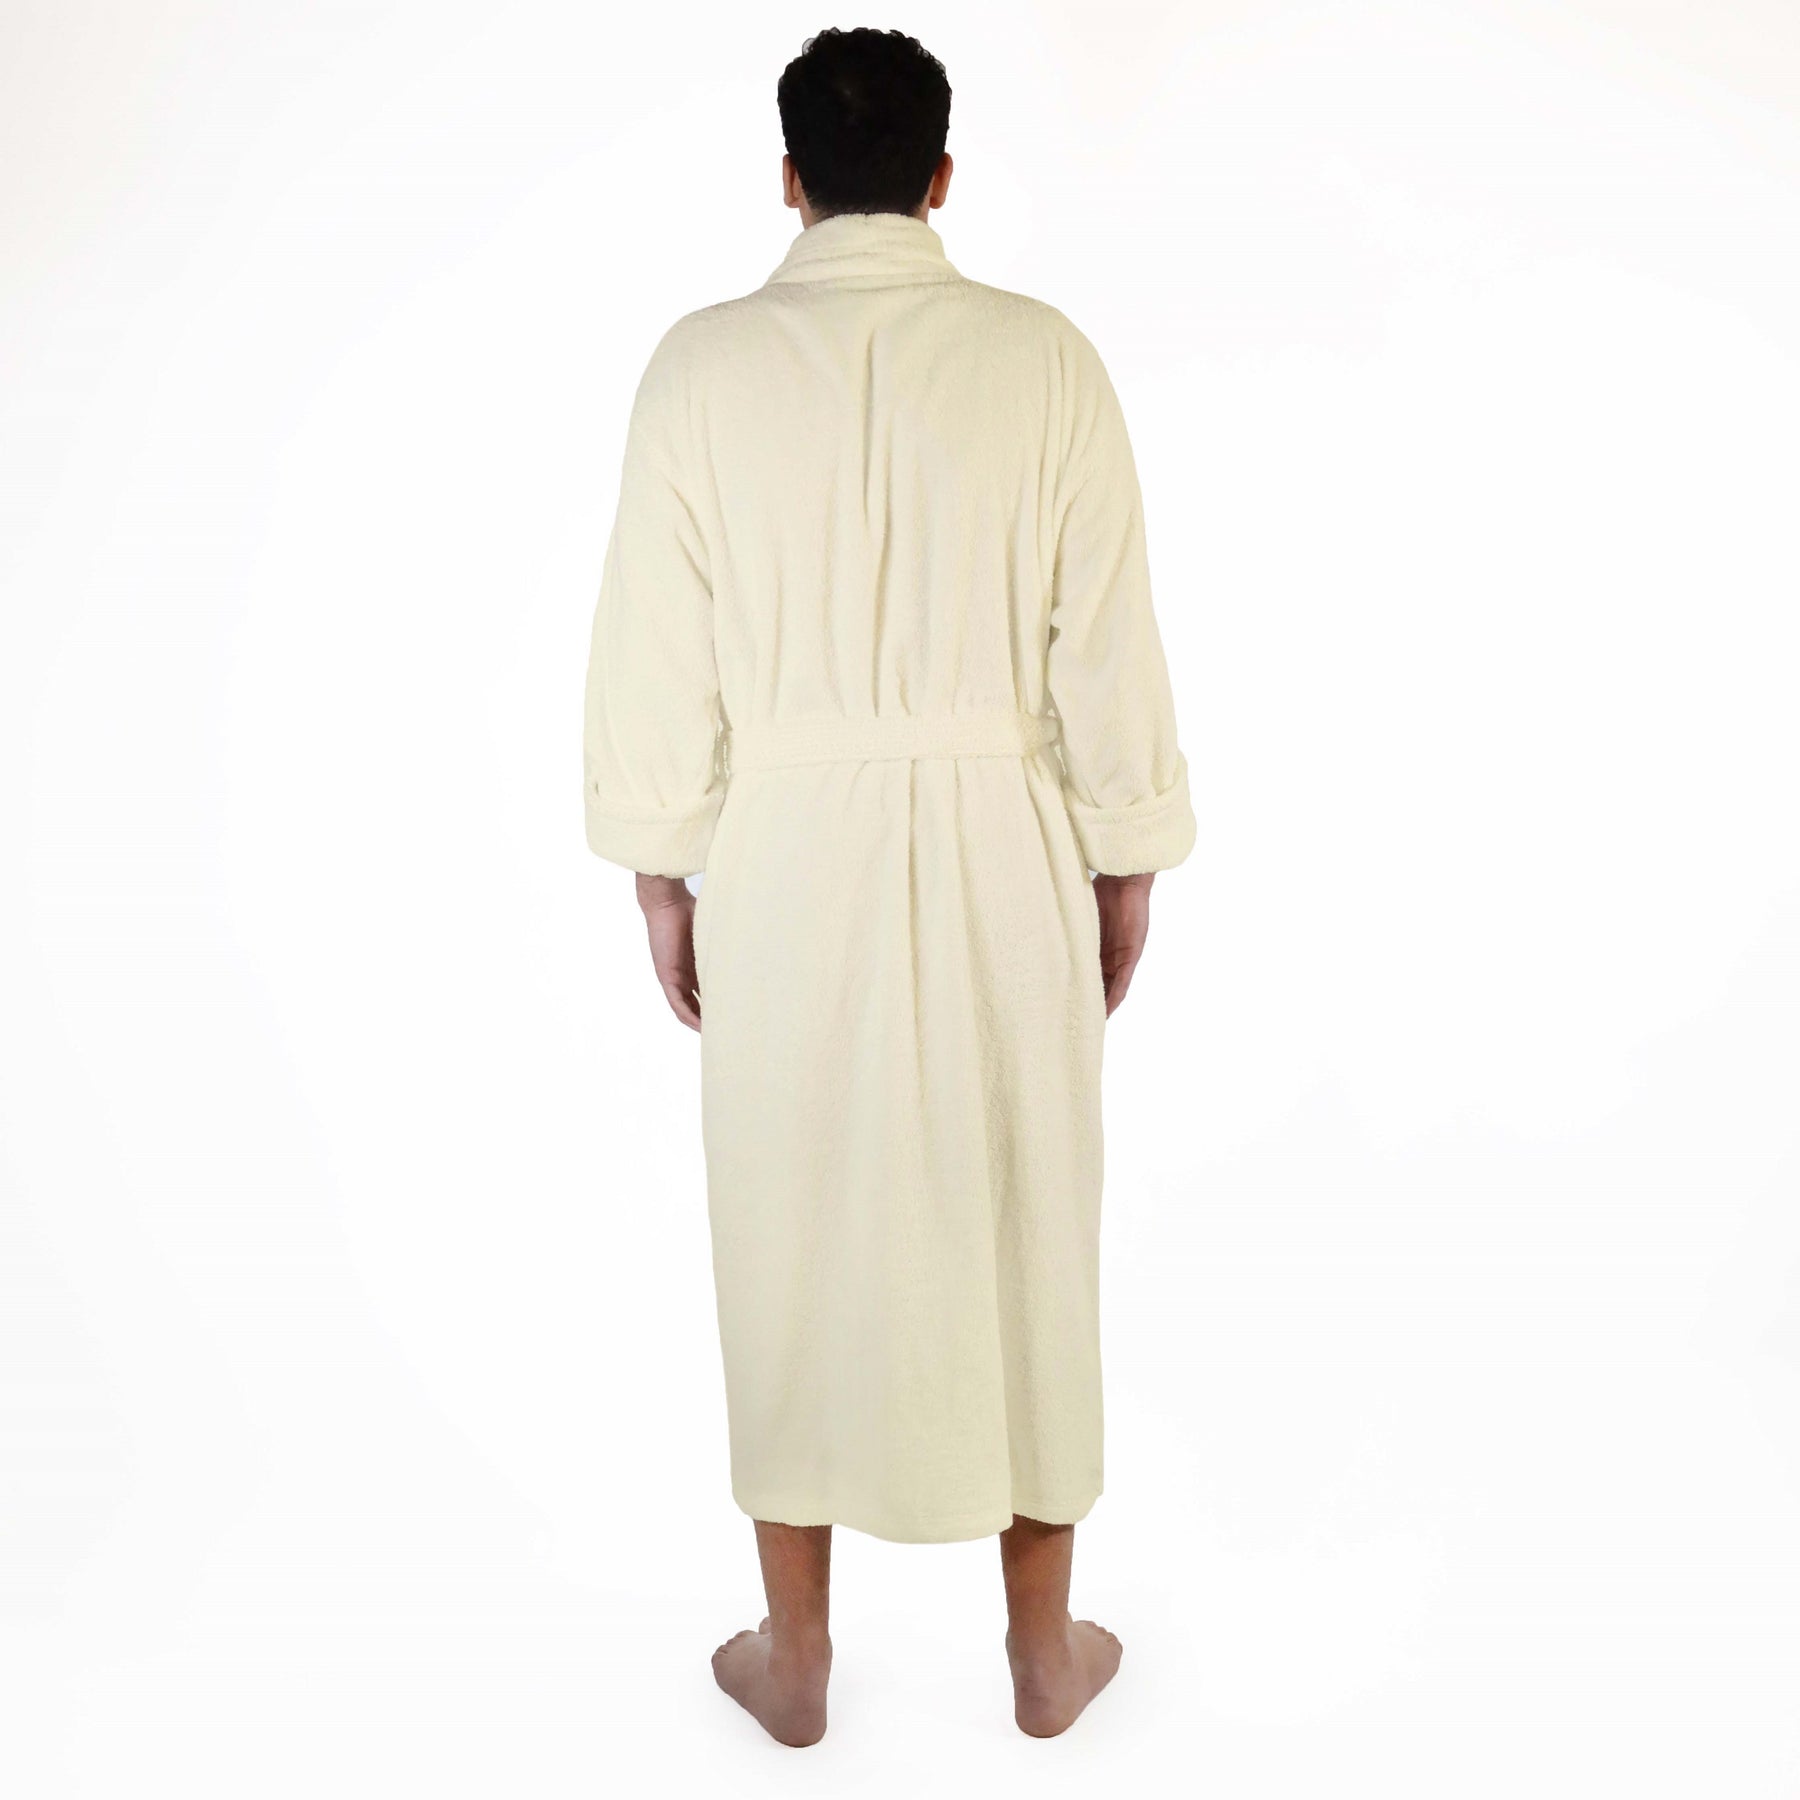 Classic Men's Home and Bath Collection Traditional Turkish Cotton Cozy Bathrobe with Adjustable Belt and Hanging Loop - Ivory